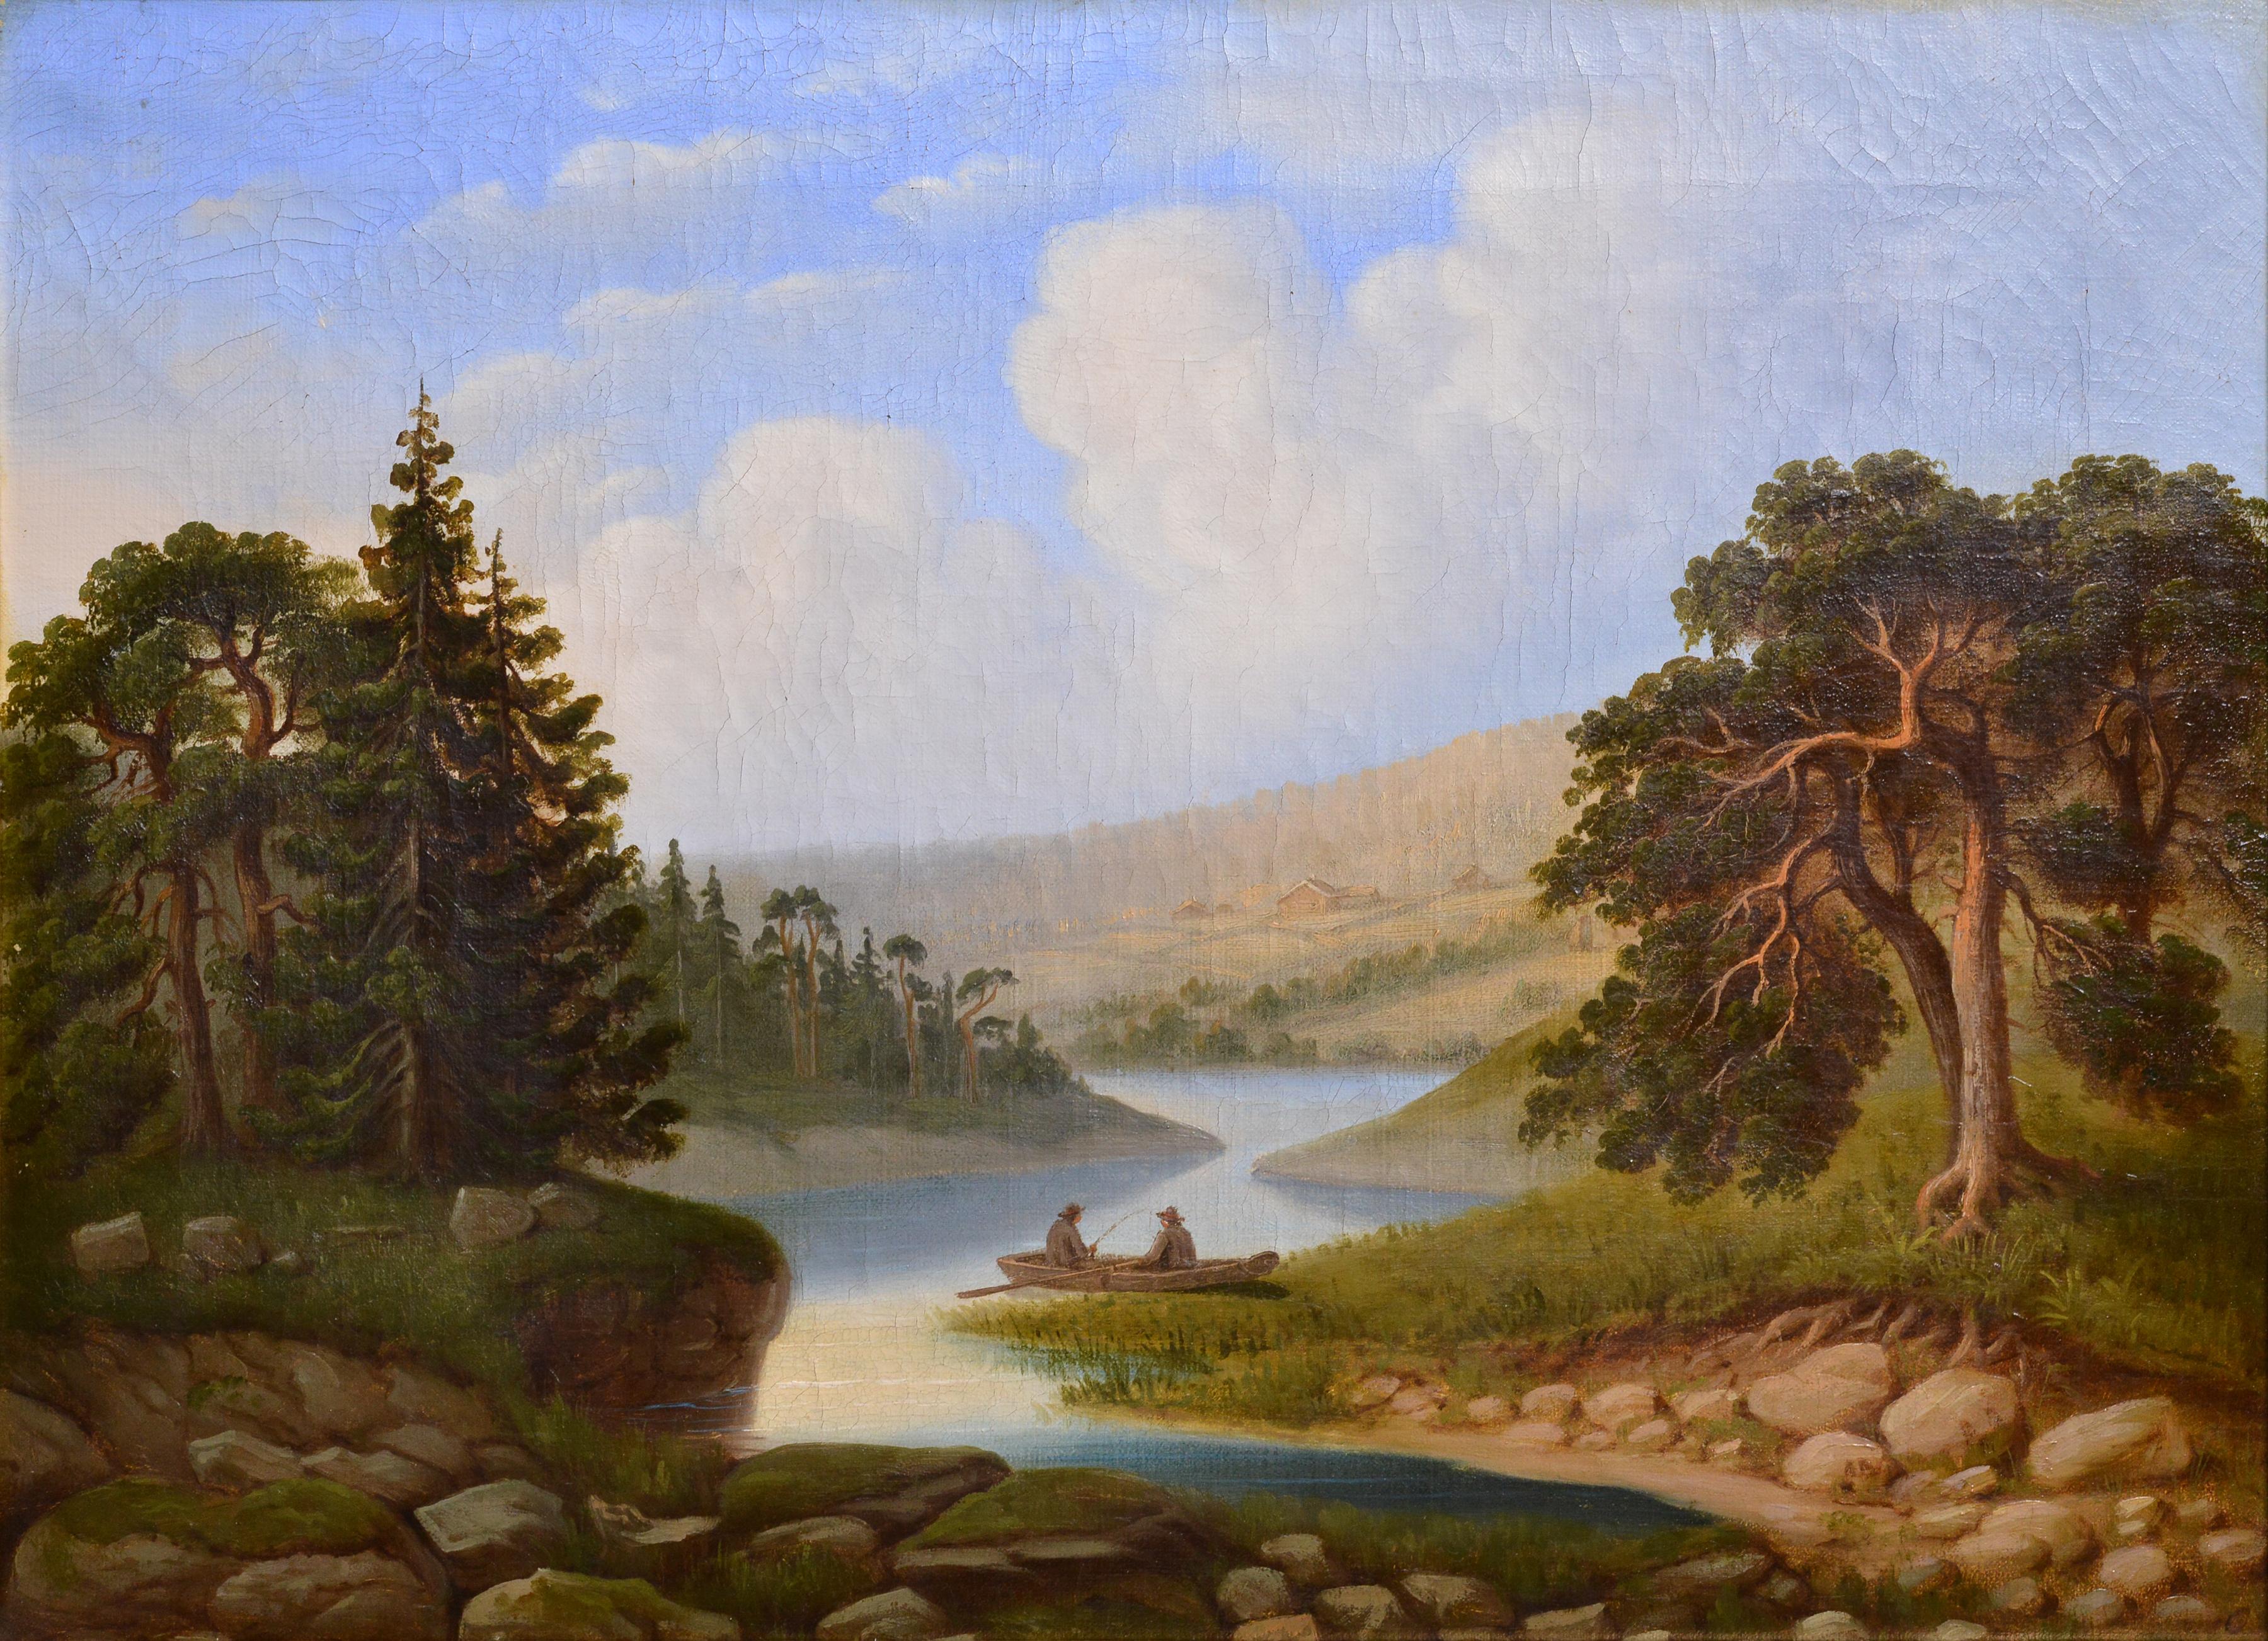 The scene of this landscape unfolds with a tranquil river nestled between rolling hills, its heavily wooded banks casting a serene backdrop. In the center of the composition, two fishermen are depicted in a boat, they relaxed and engaged in